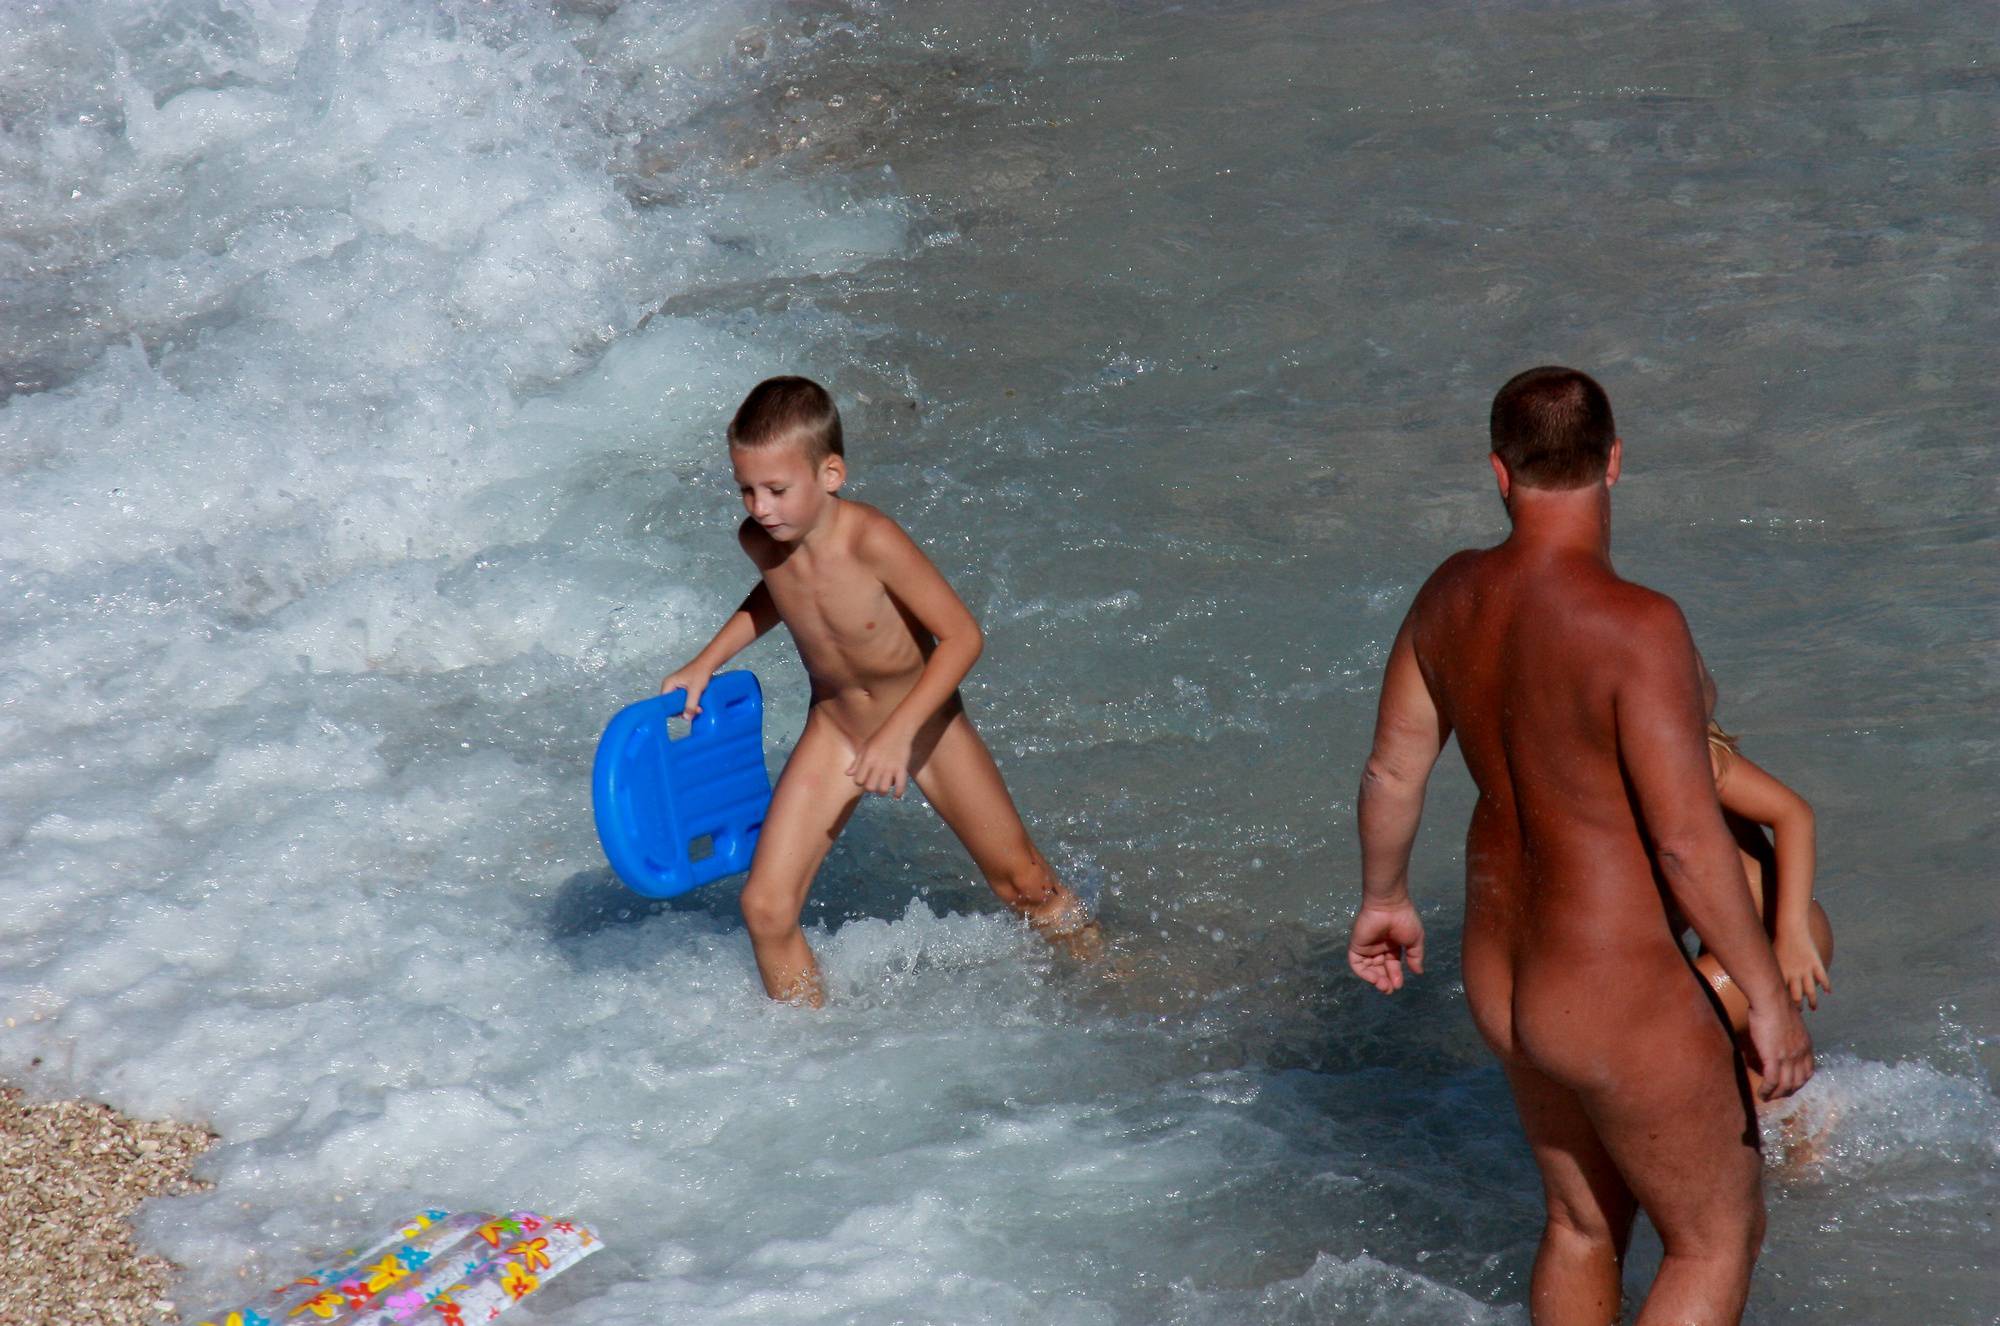 Pure Nudism Images Nudist Kid Family Floaters - 2